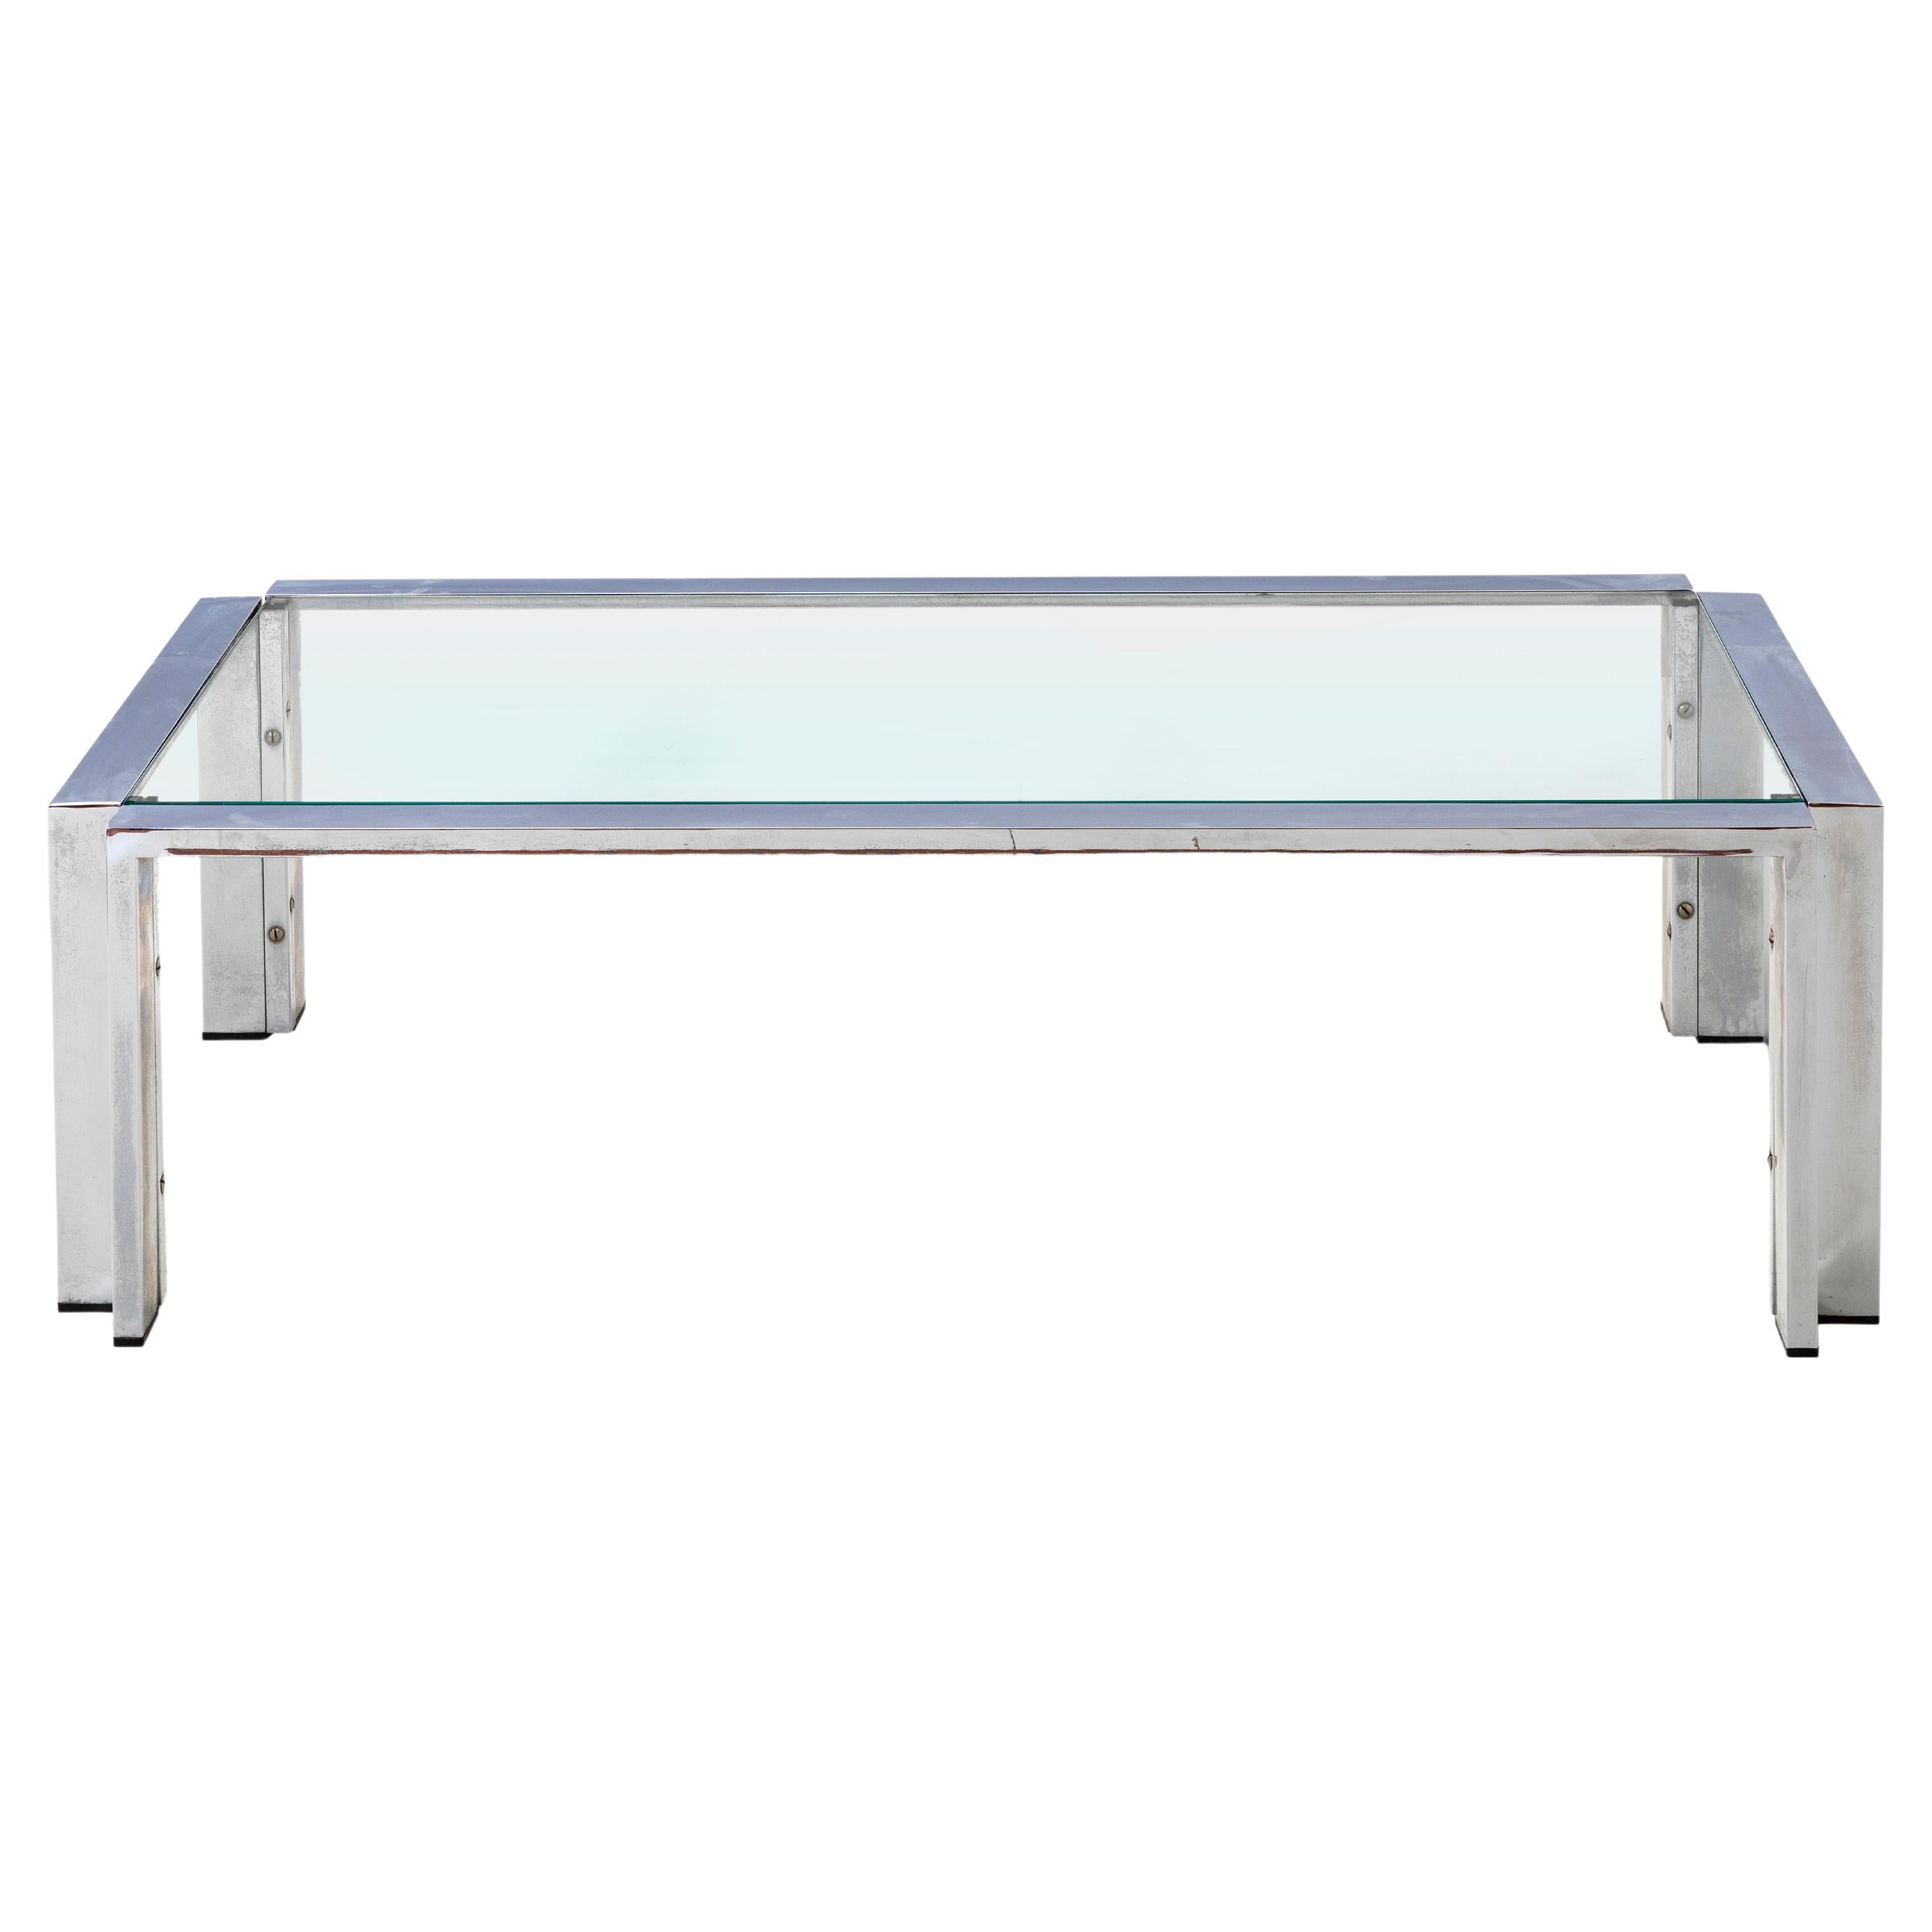 Romeo Rega Prod. Italy, C. 1970 Glass Table with Steel Frame and Edges For Sale